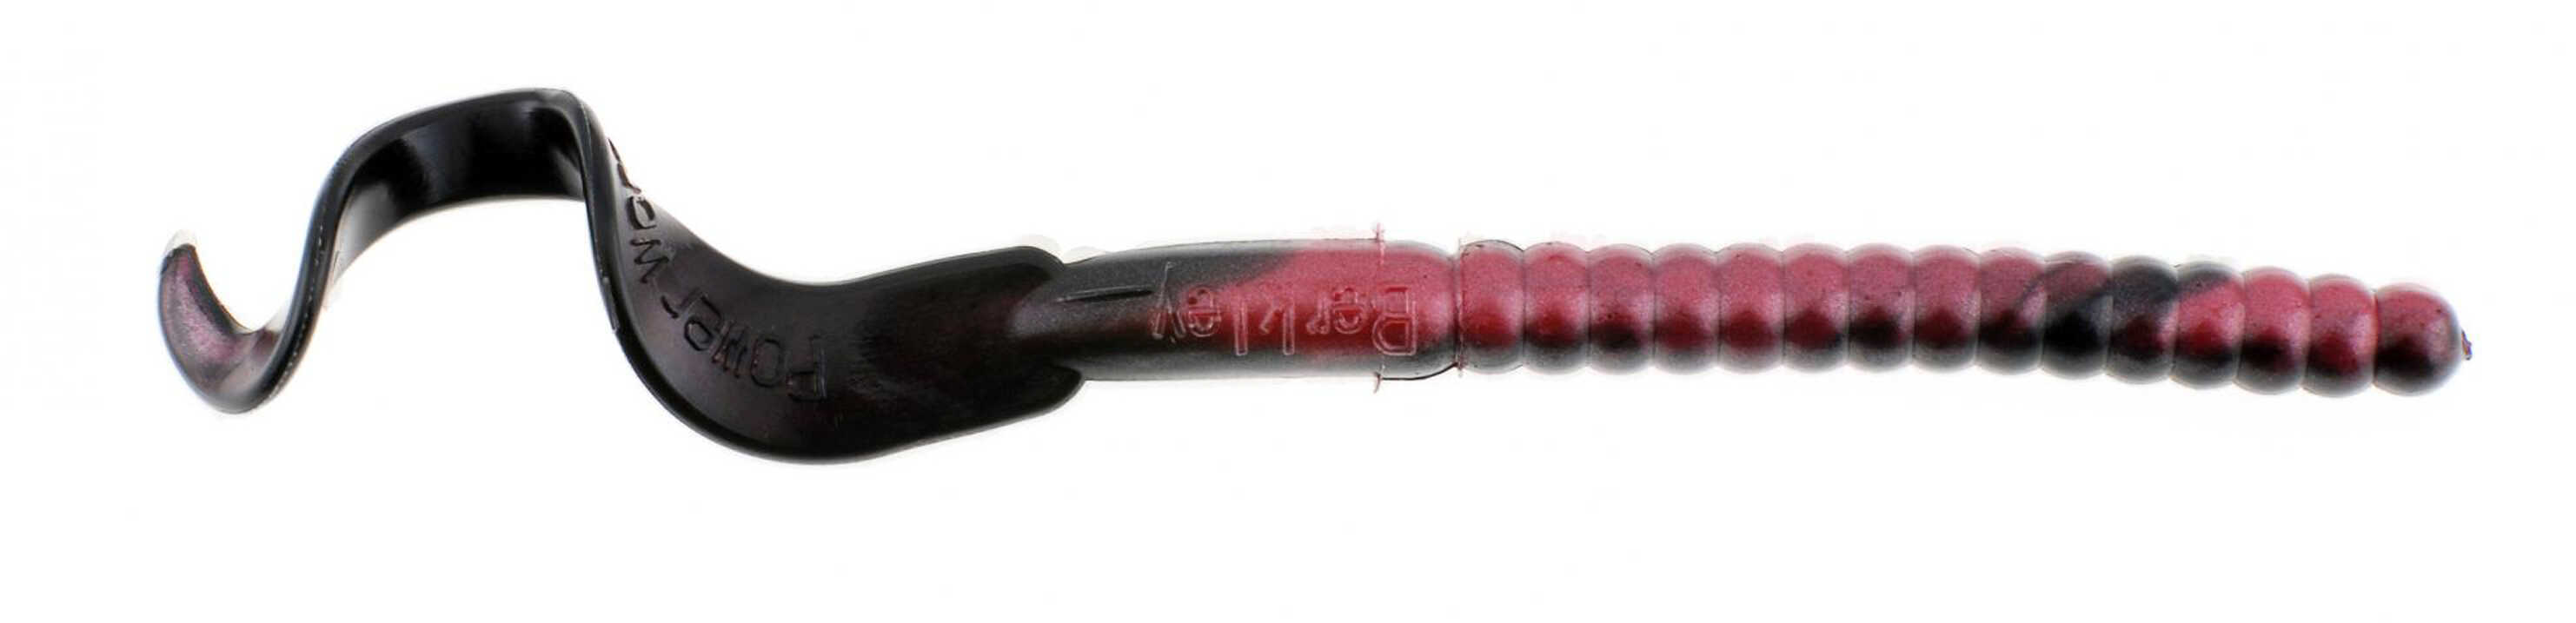 PWRBAIT WORMS 7" RED SHAD 13PK